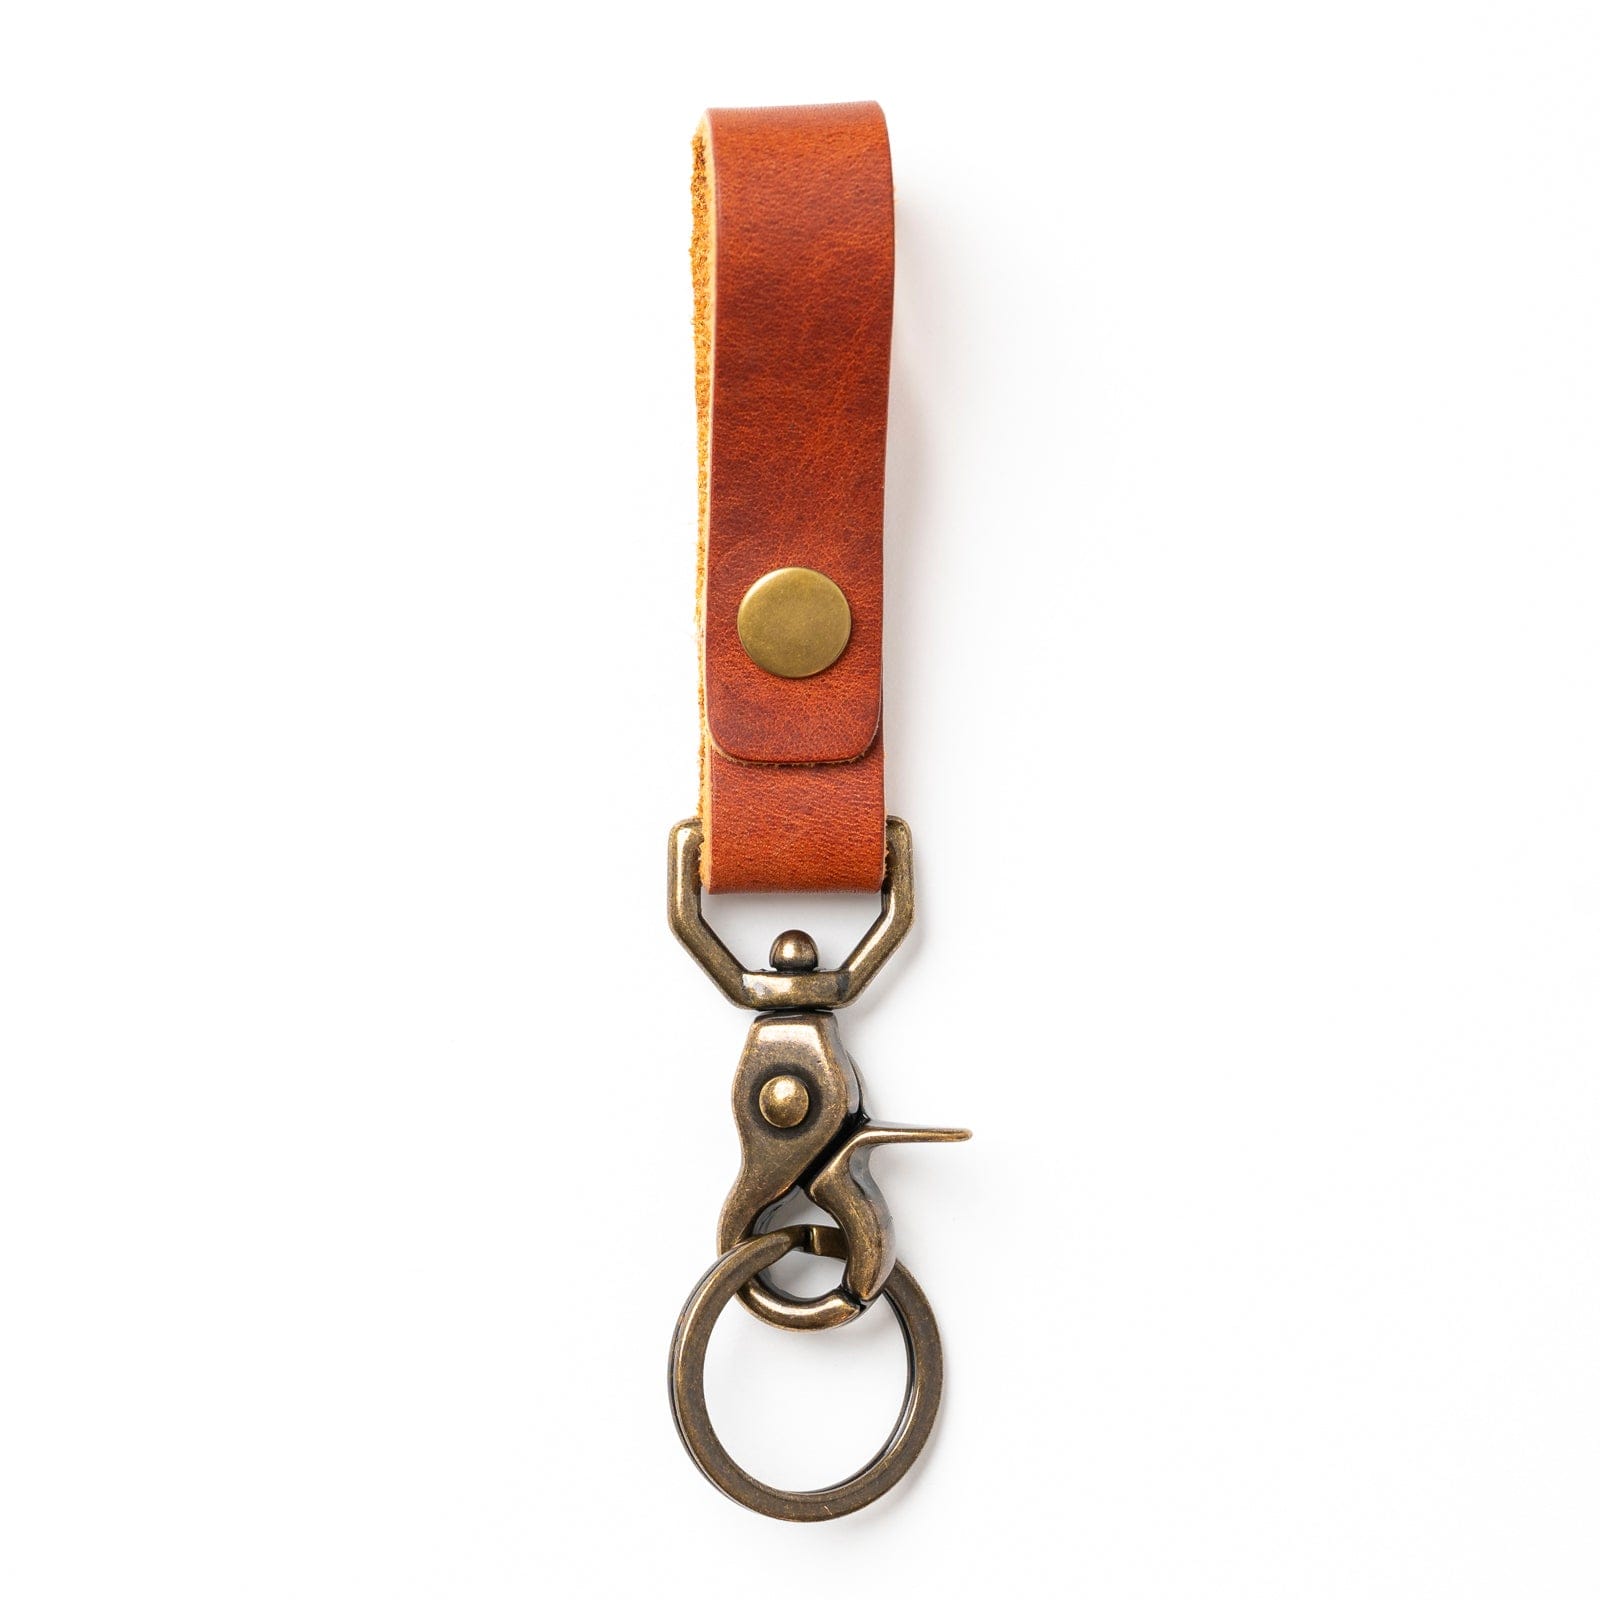 Brown leather key chain for men – CASUPO